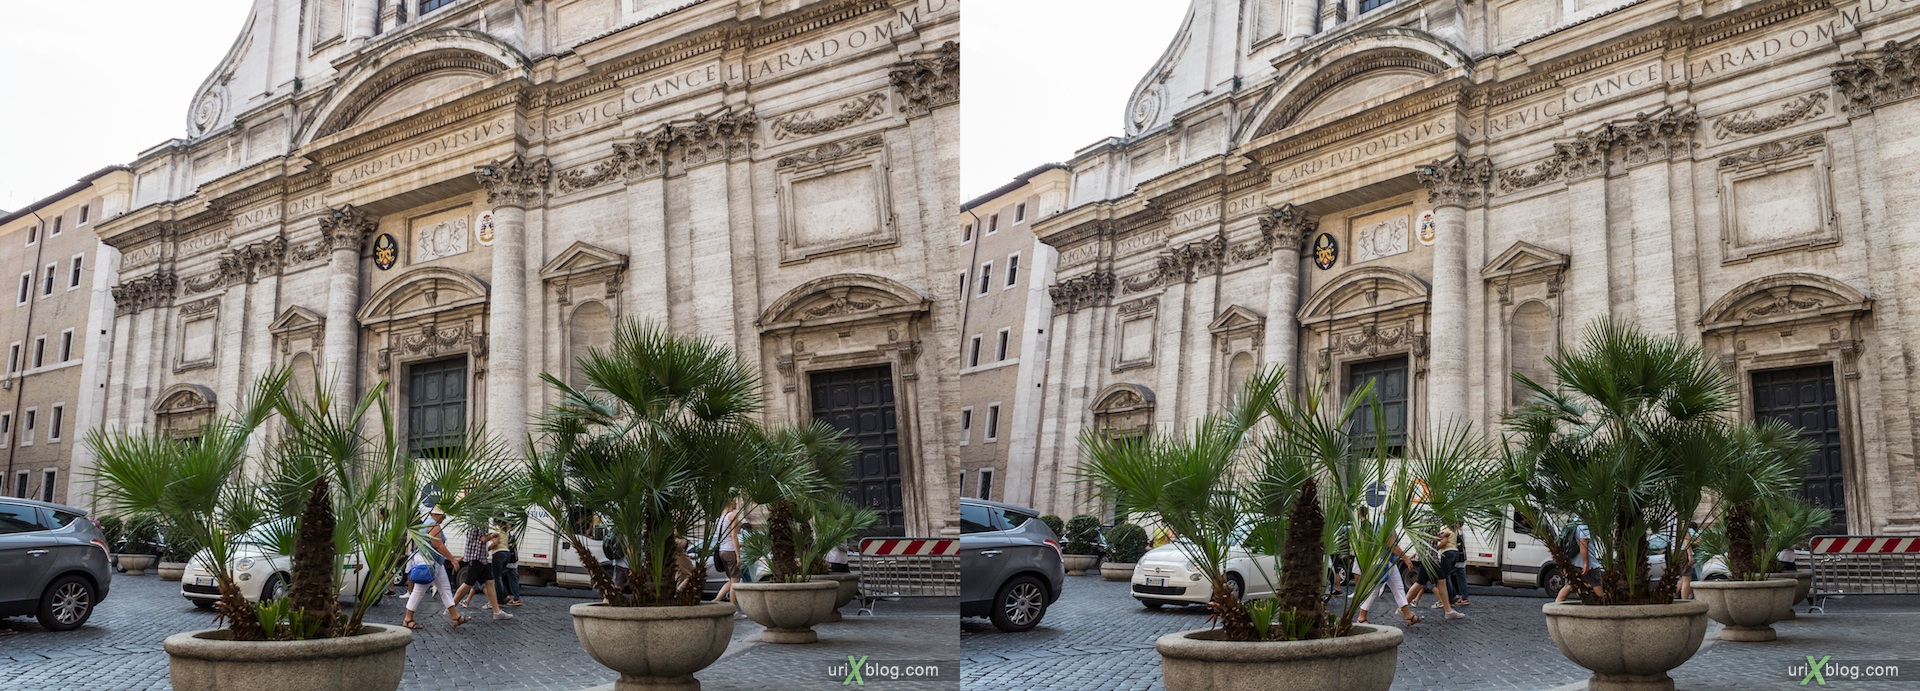 2012, church of Sant'Ignazio, Rome, Italy, cathedral, monastery, Christianity, Catholicism, 3D, stereo pair, cross-eyed, crossview, cross view stereo pair